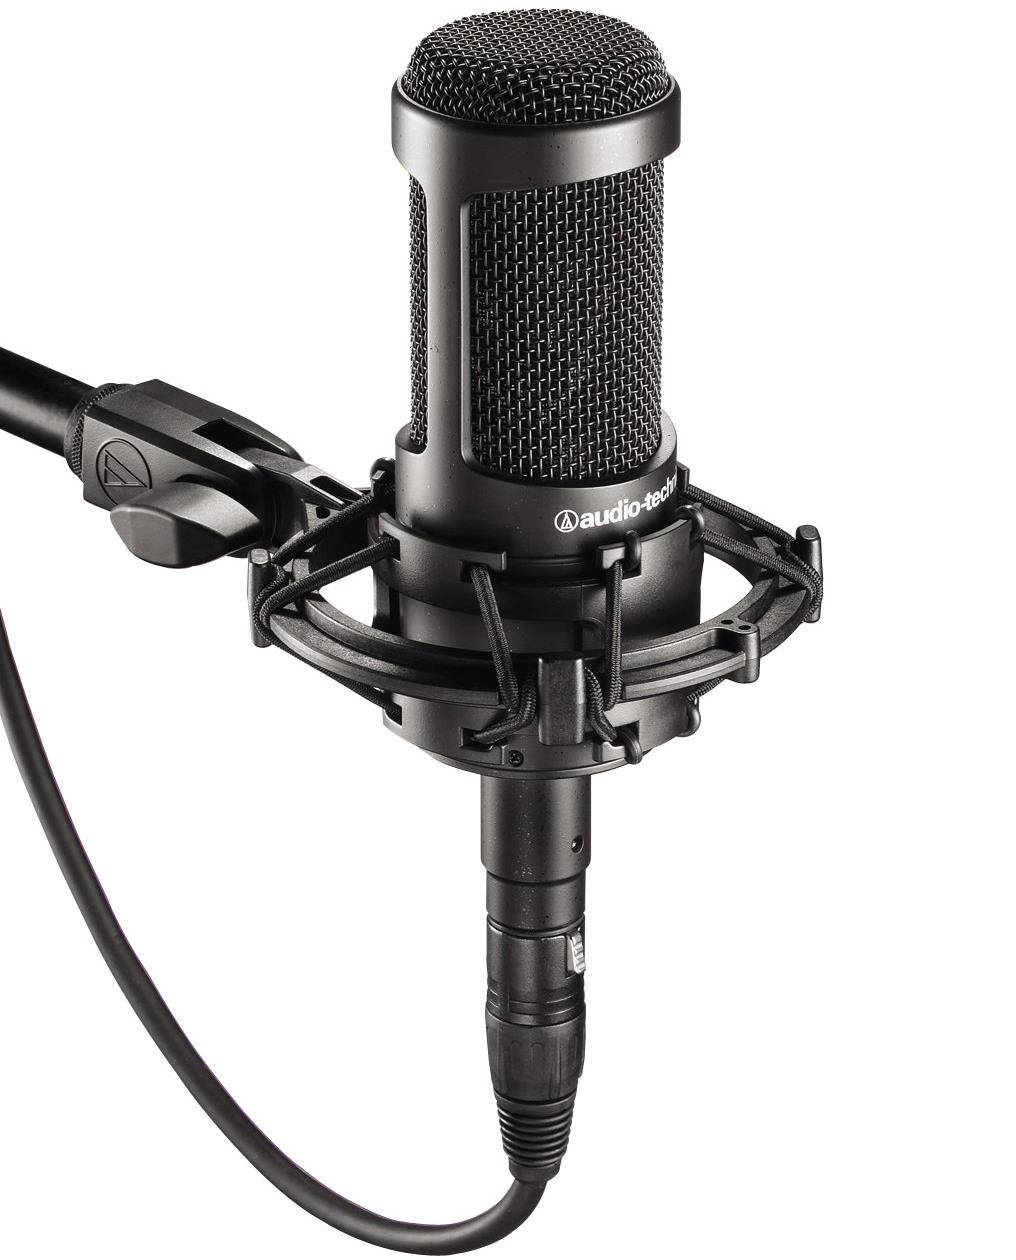 Why Choose the AT2020 Microphone